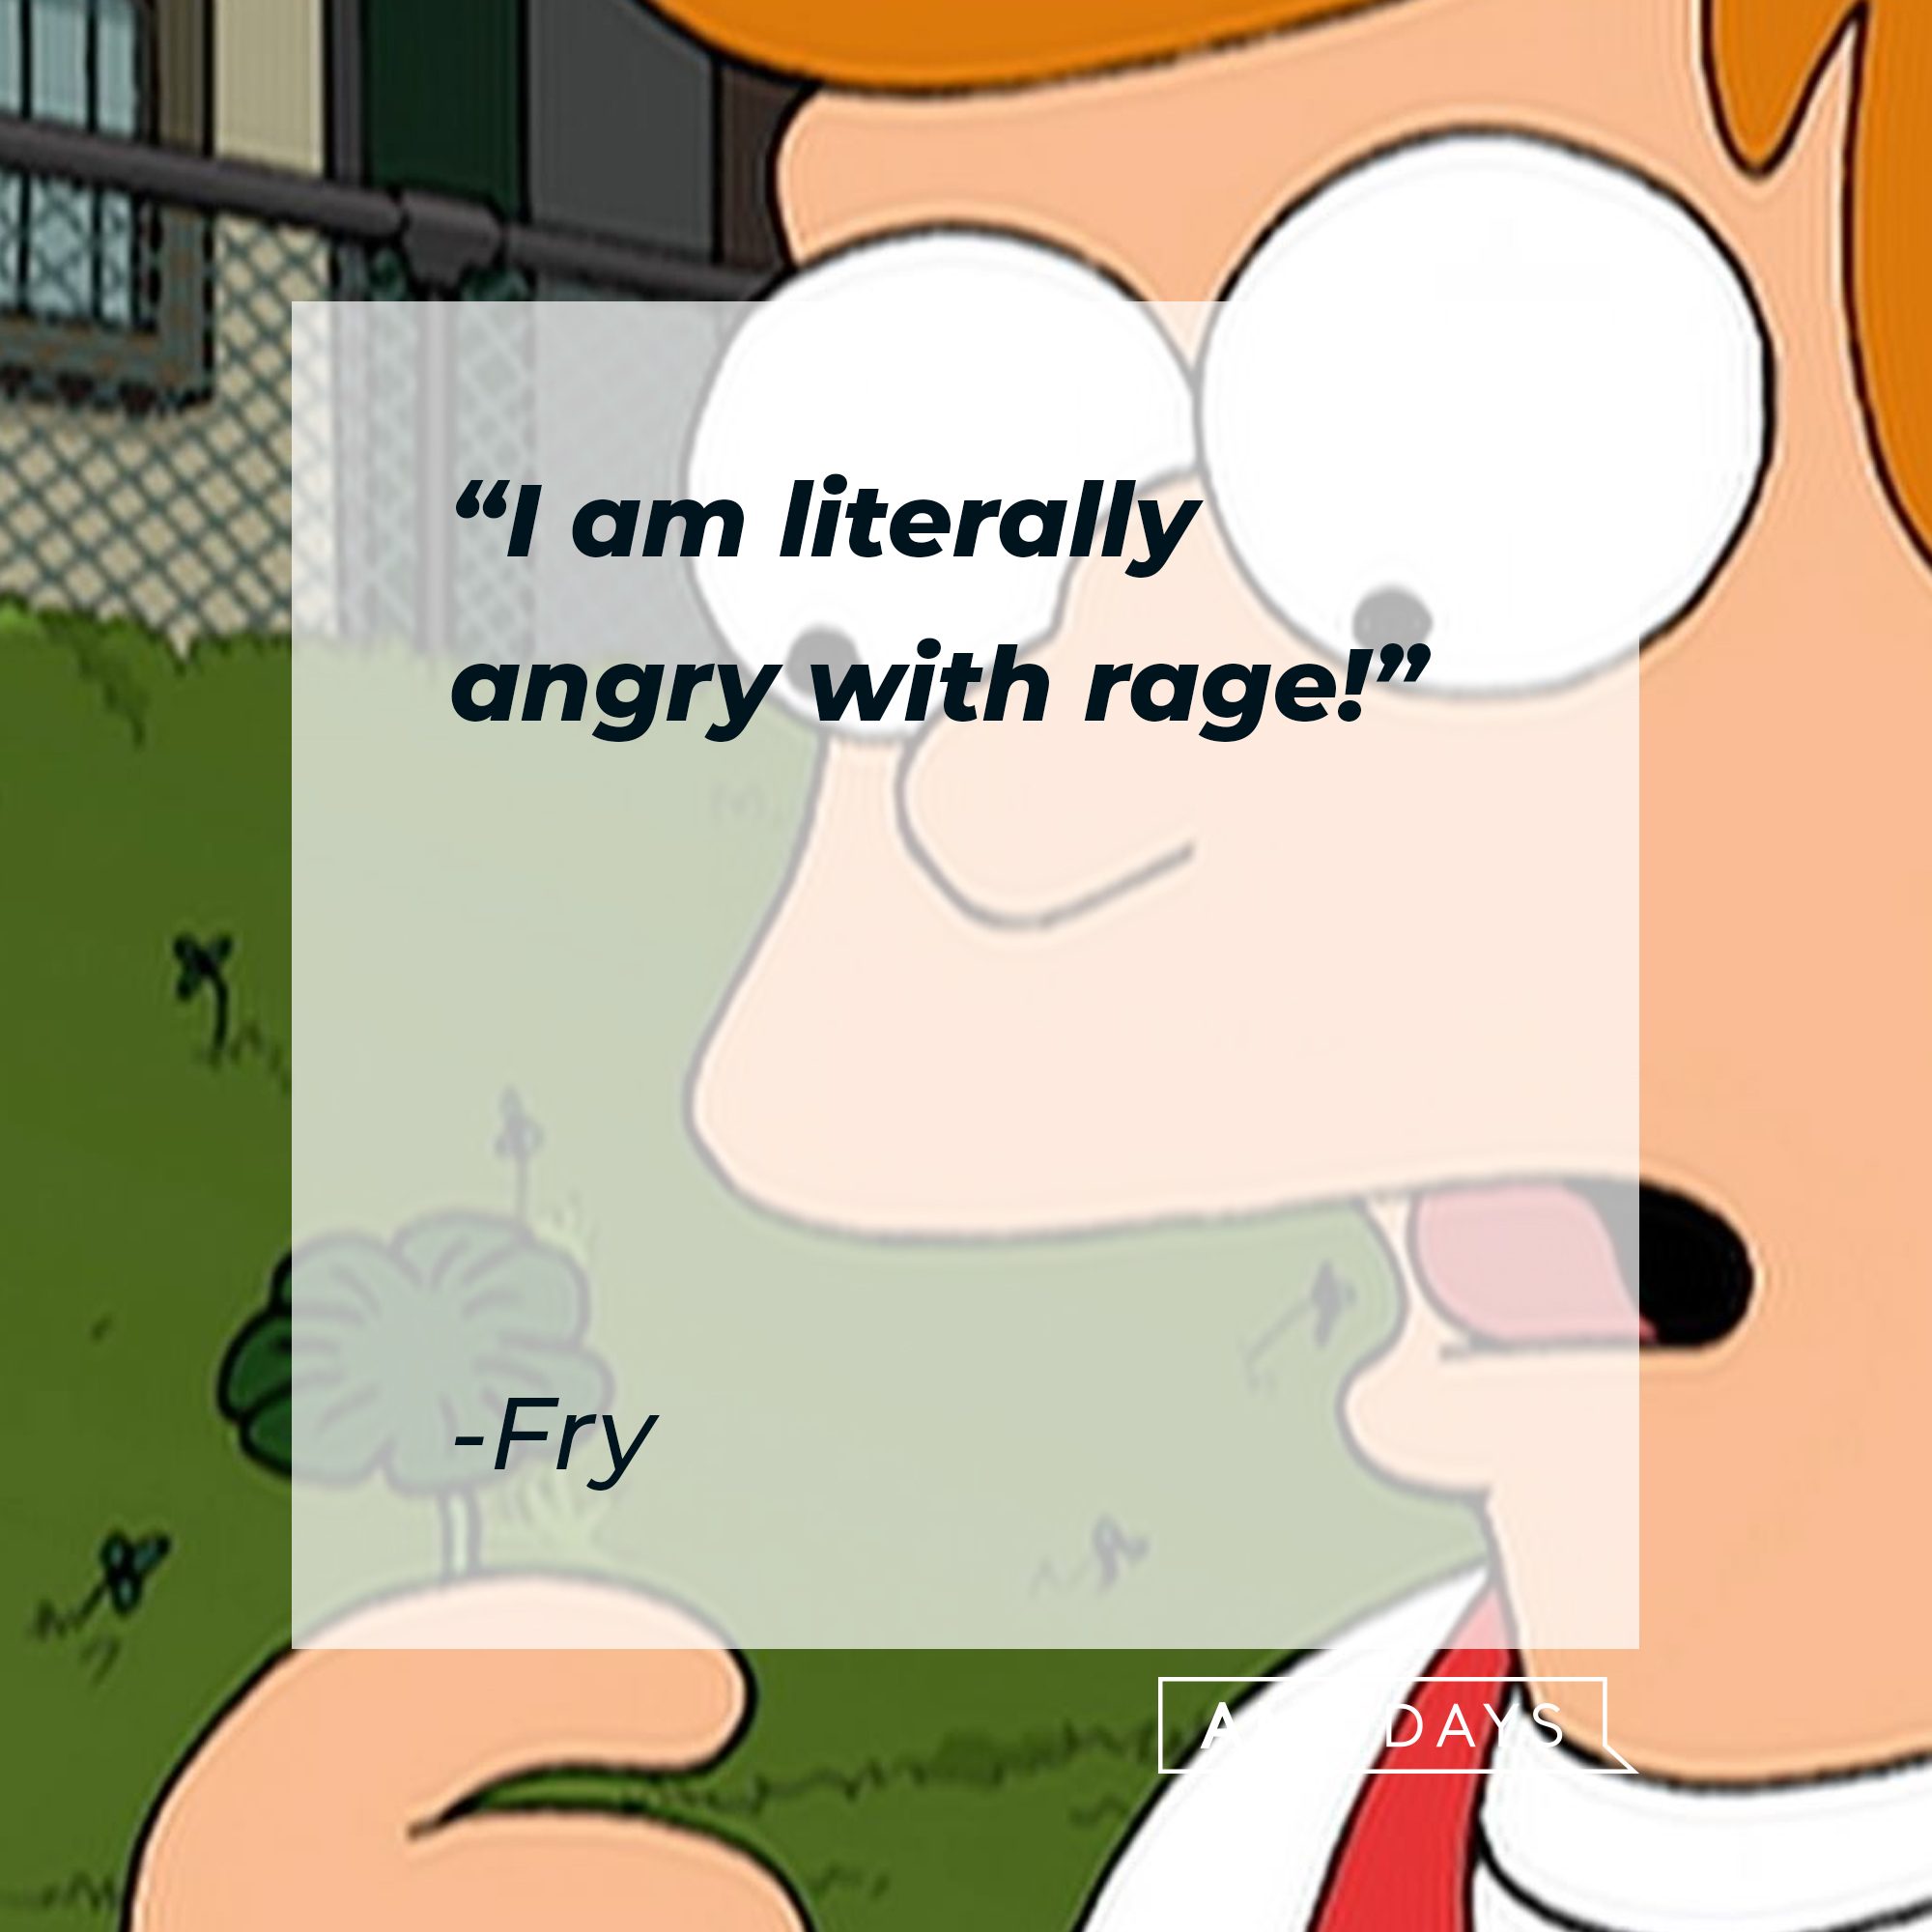 Fry Futurama's quote: "I am literally angry with rage!" | Source: Facebook.com/Futurama